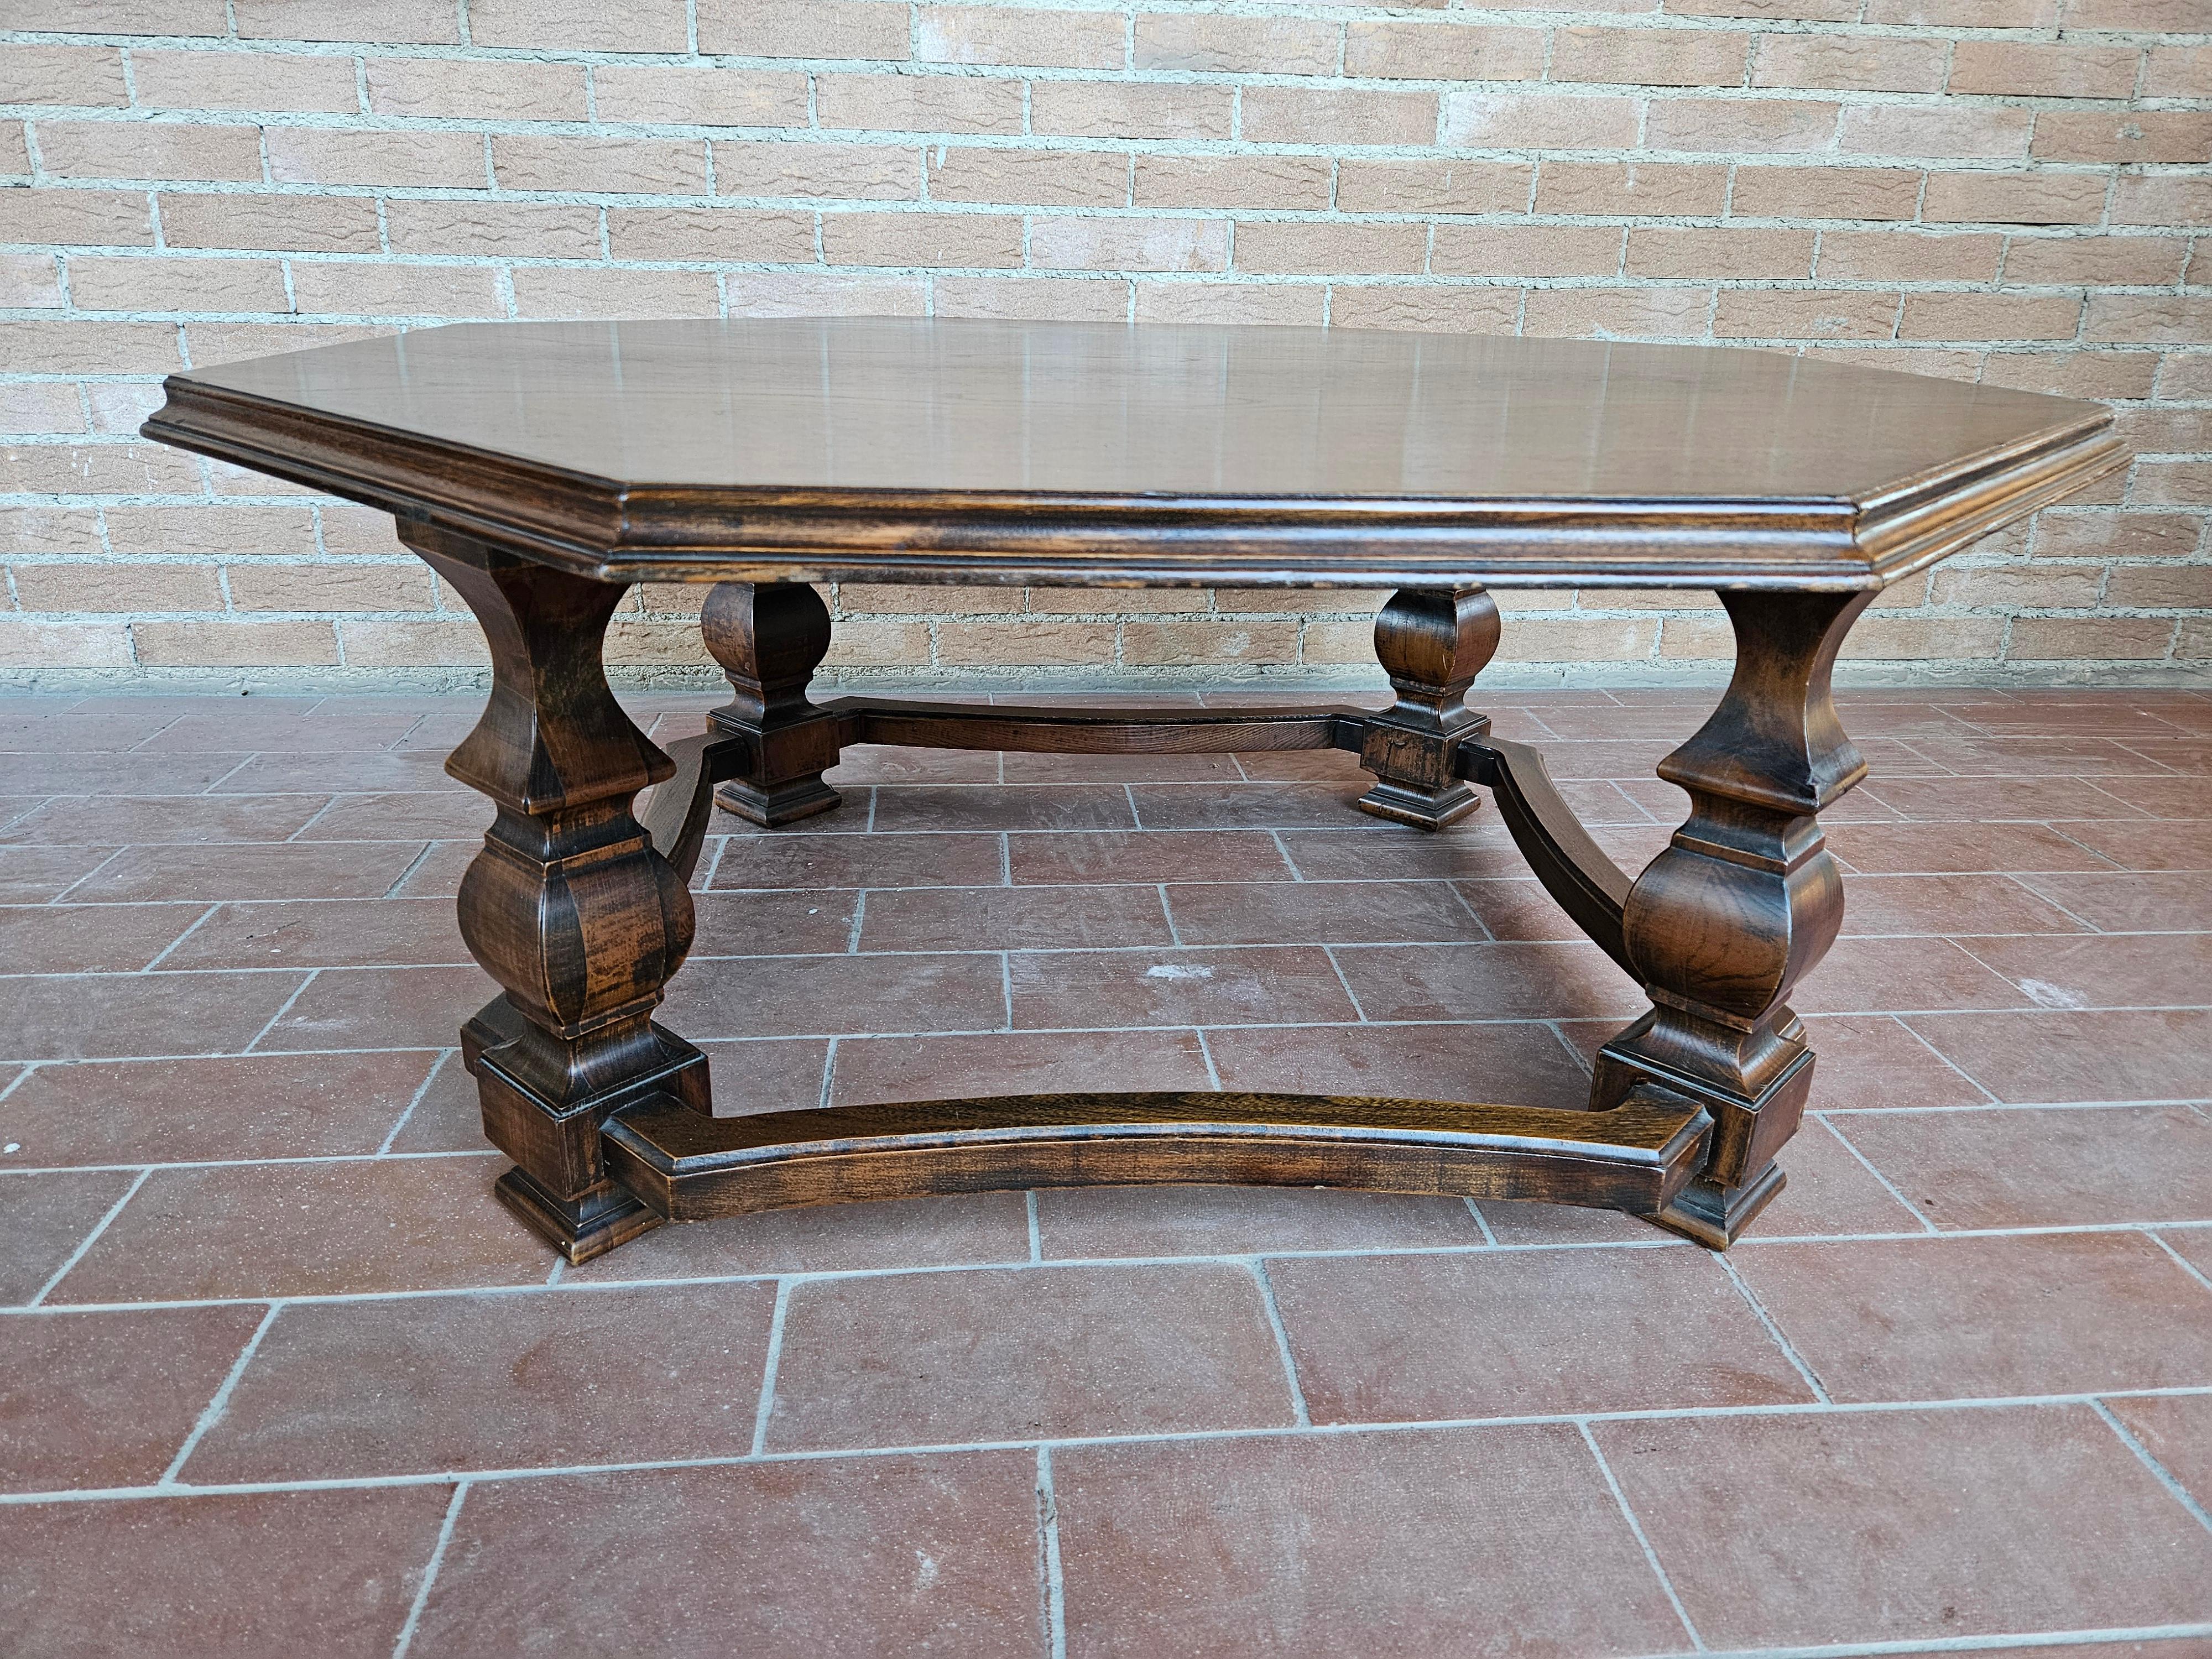 Octagonal shaped wooden coffee table, perfect for use as a coffee table or for hosting guests.

Normal signs of wear due to age and use.
